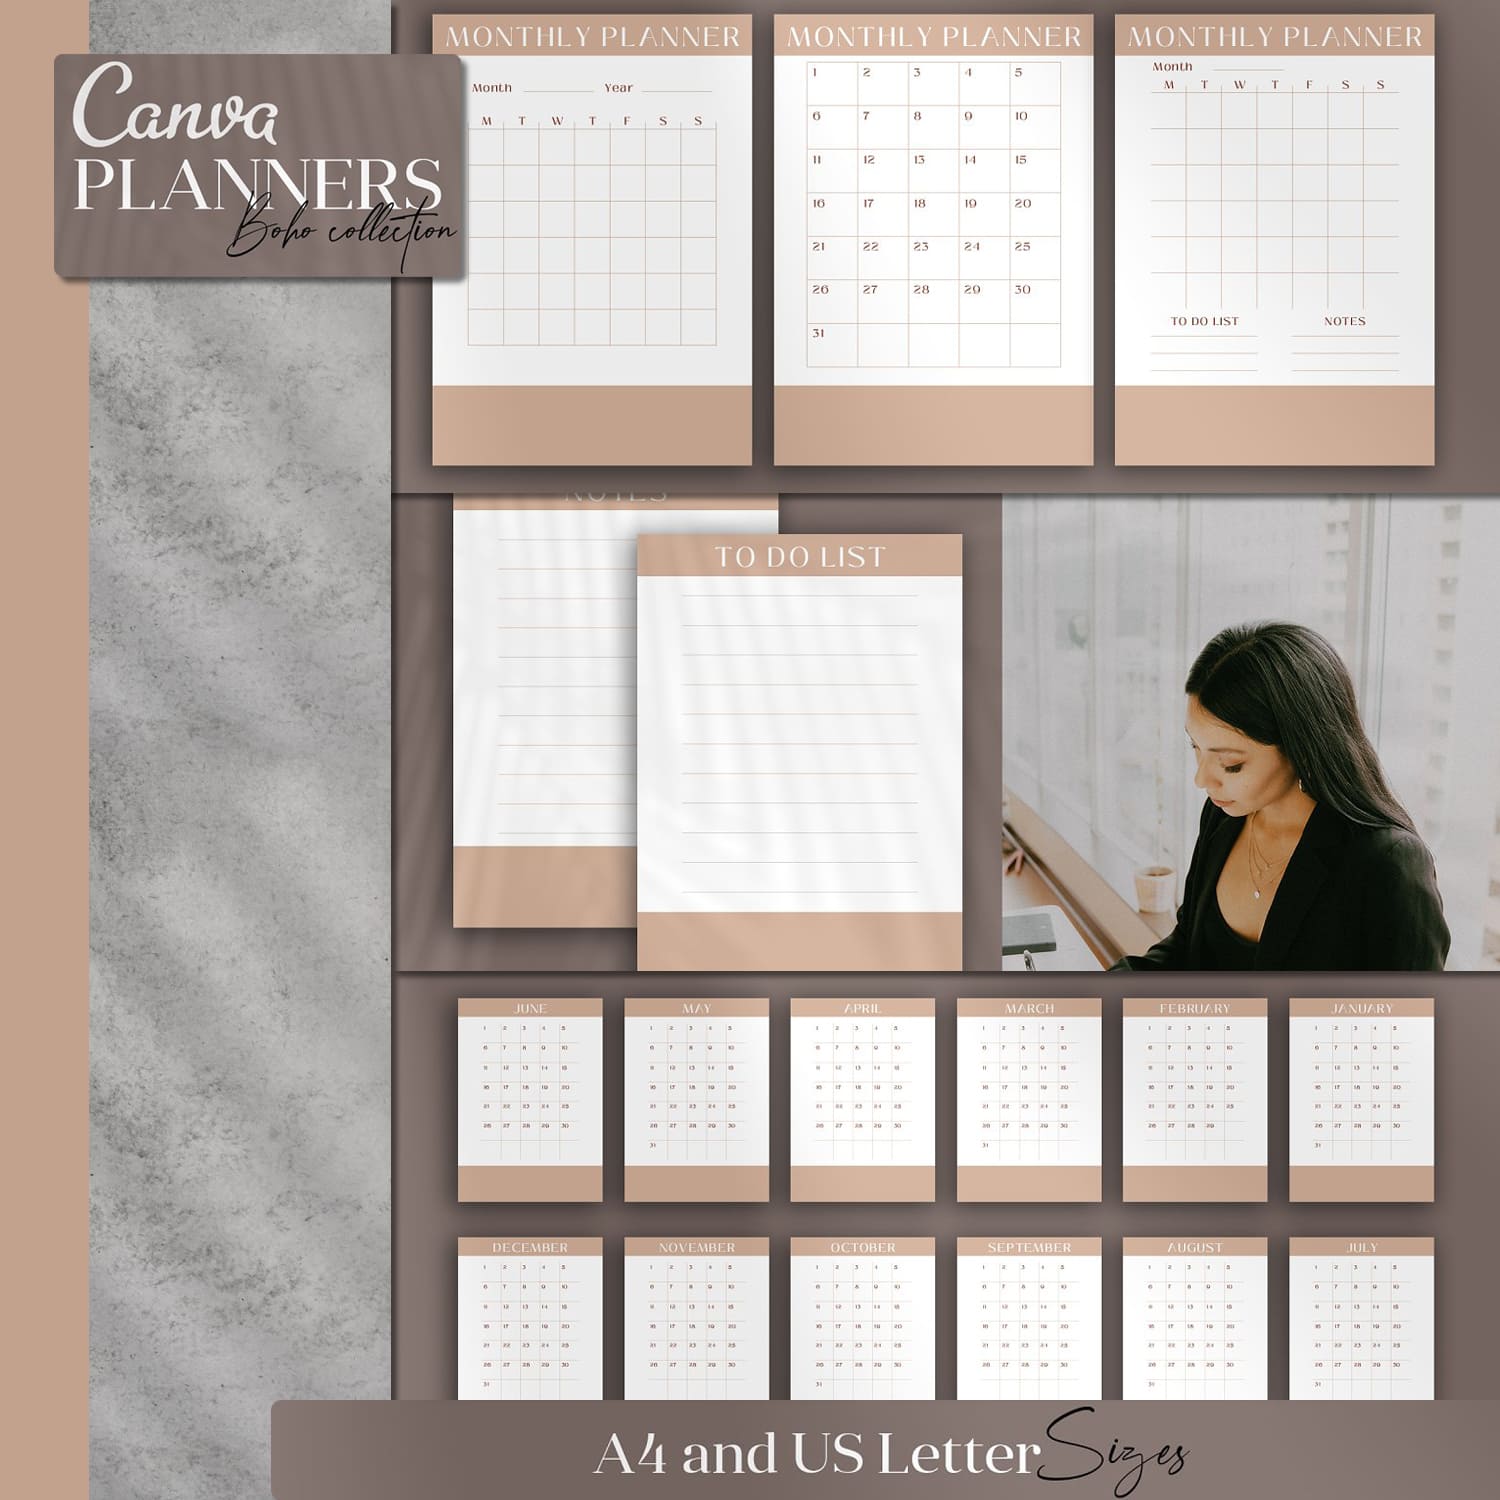 CANVA Planners Boho collection cover.